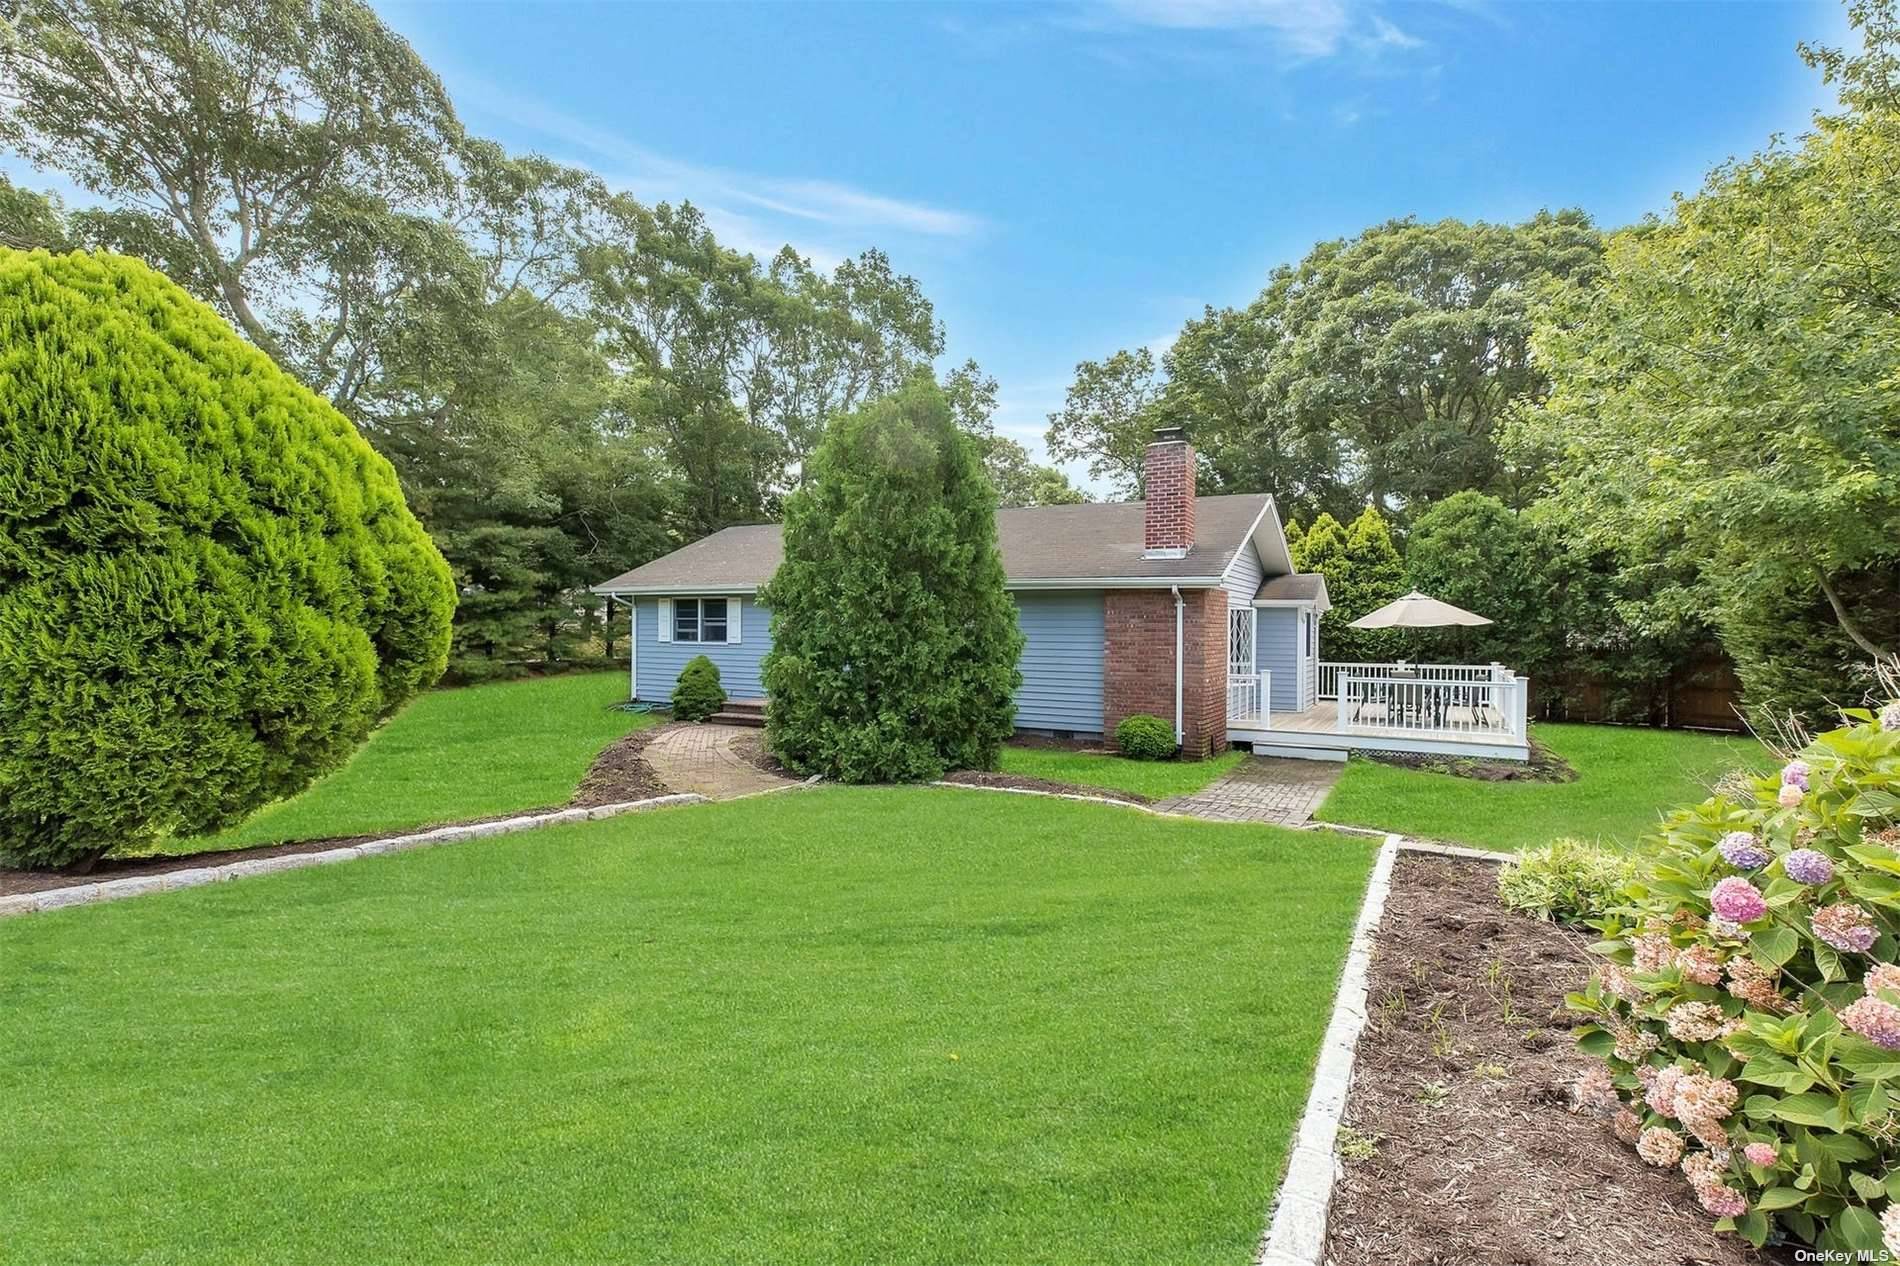 Adorable ranch style home on a very desirable road south of the highway in Hampton Bays.